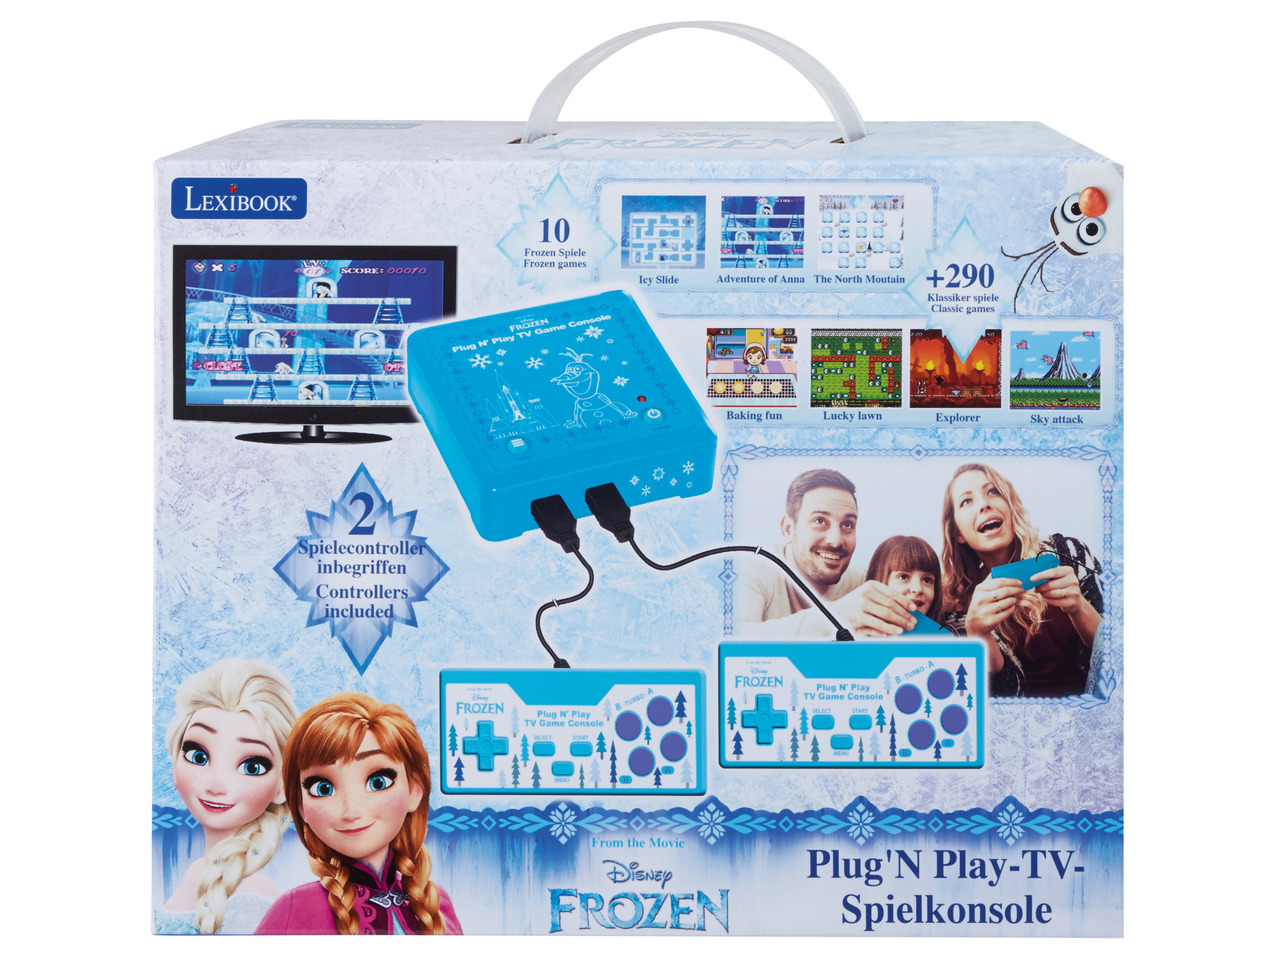 lexibook plug and play tv game console